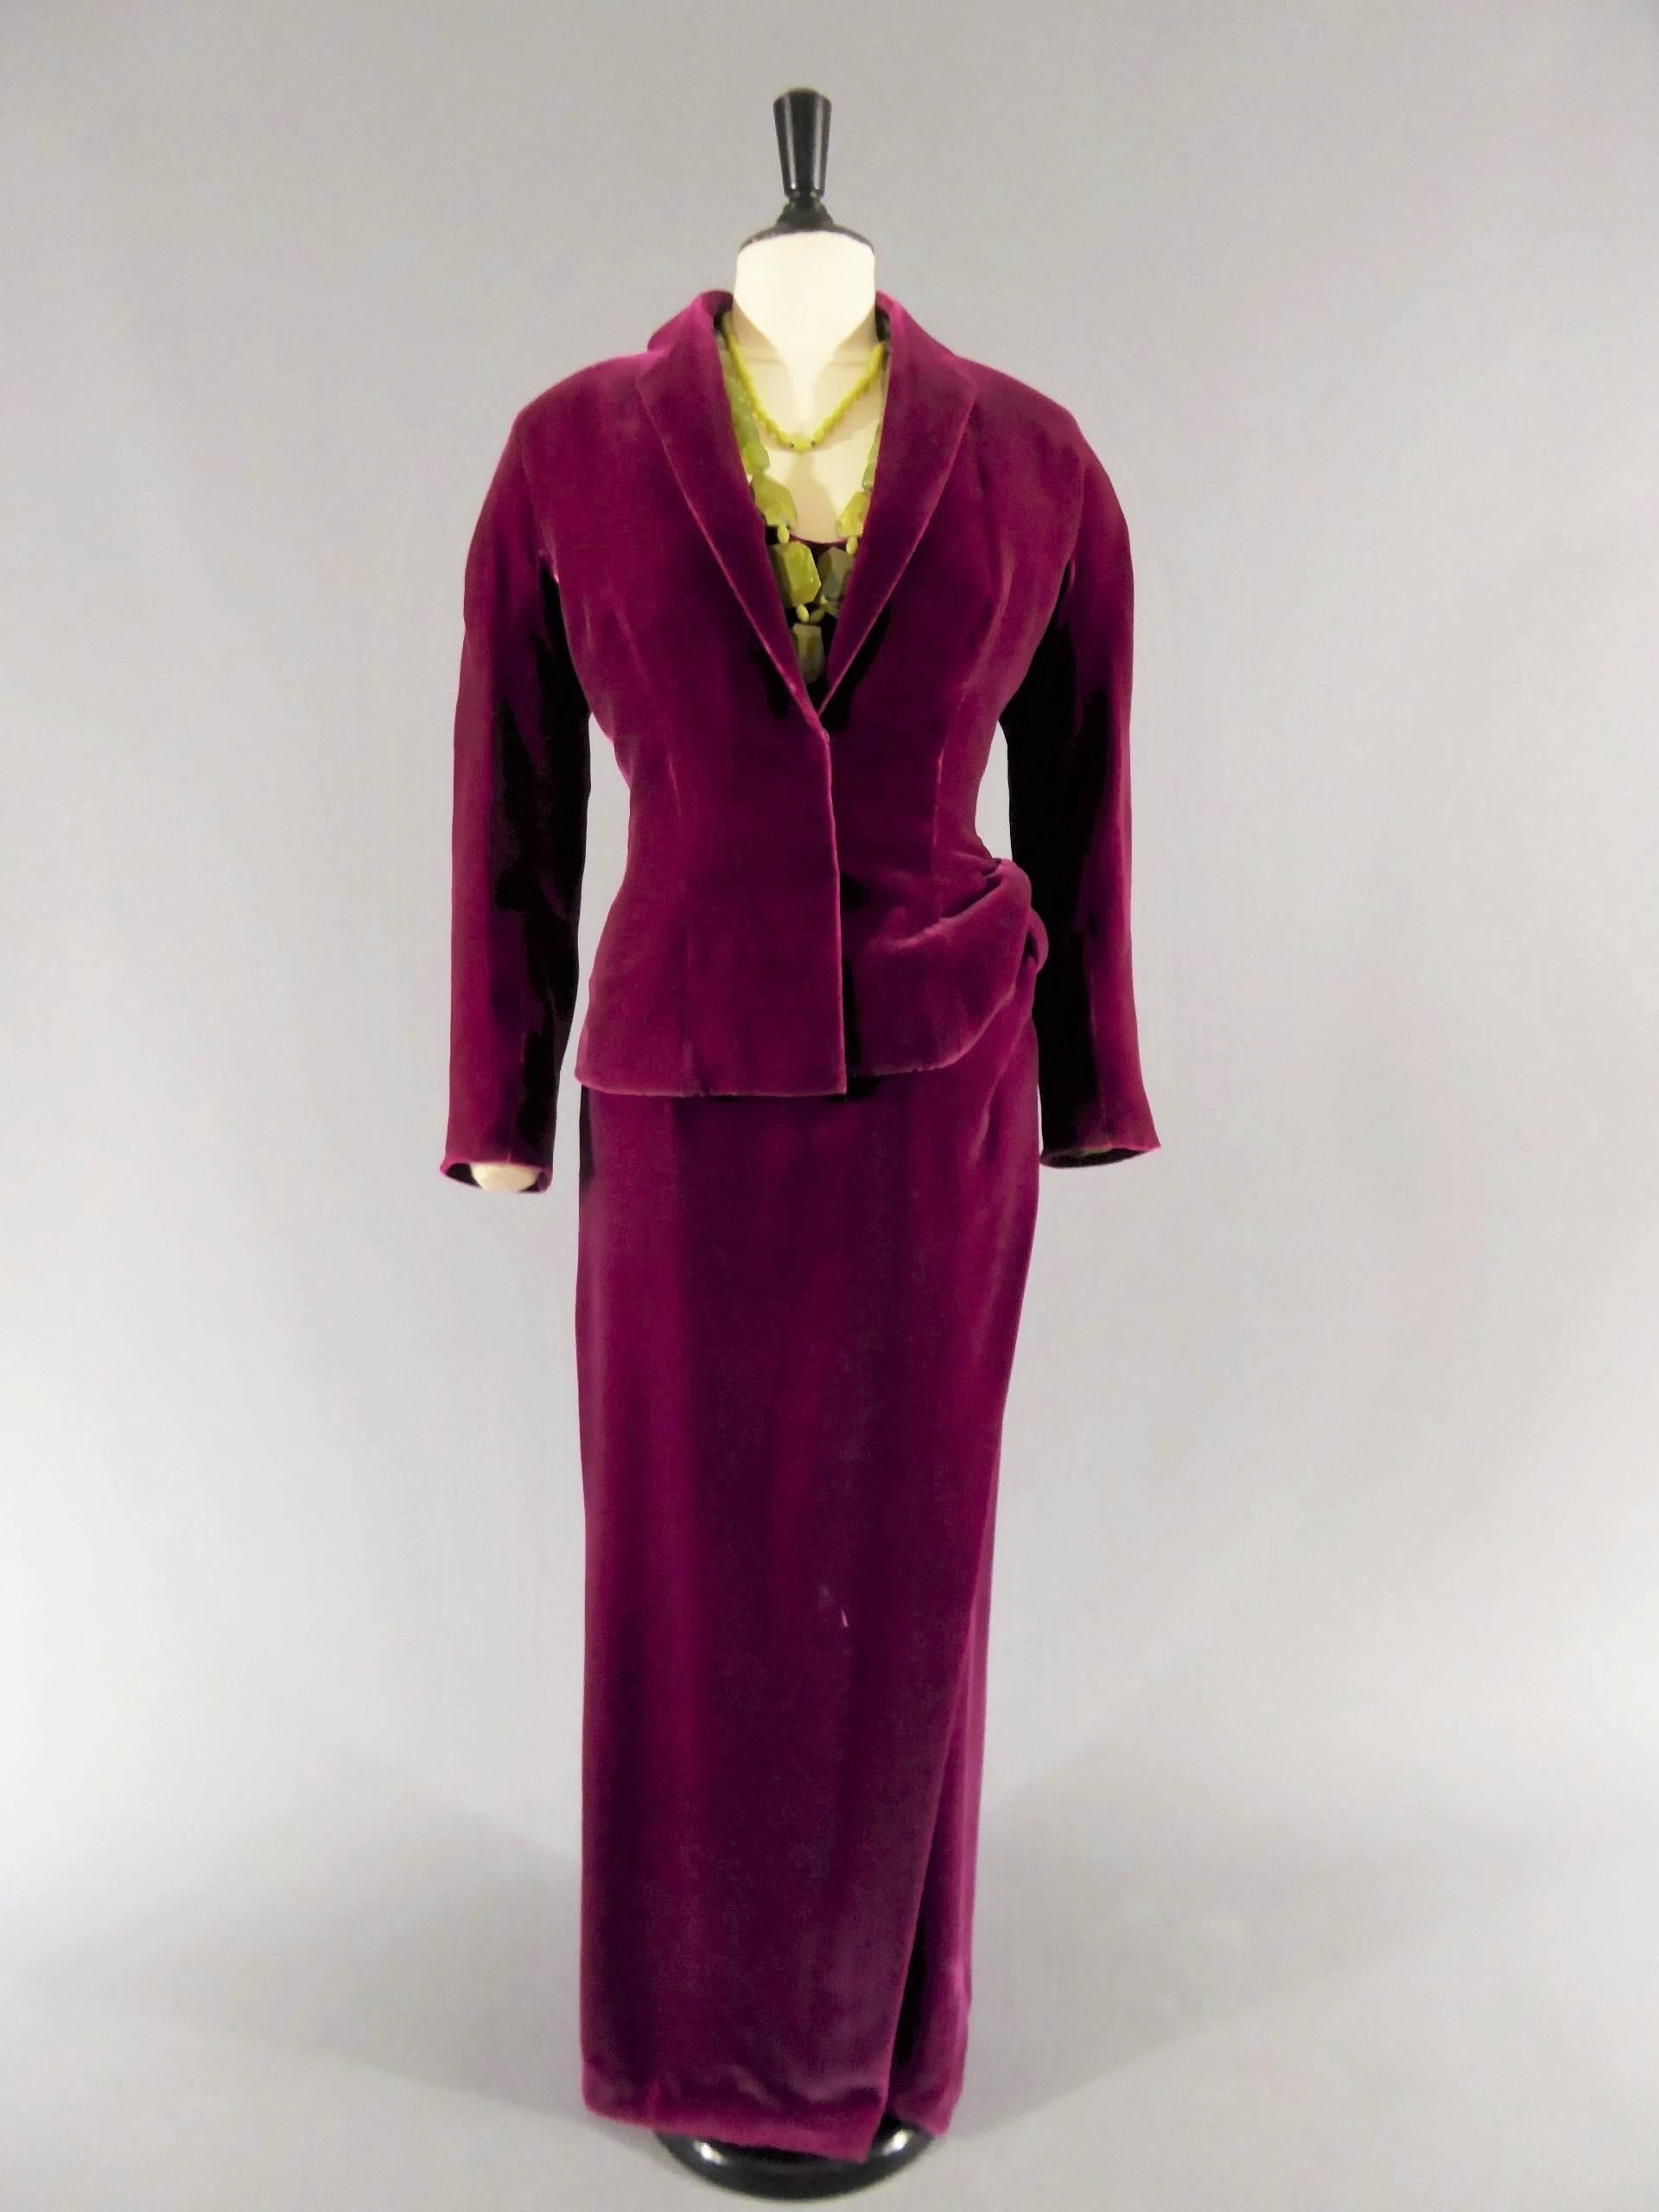 Jean-Paul Gaultier Haute Couture Four pieces belonging to catherine Deneuve
Paris 2004
Aubergine velvet ensemble lined with light green chiffon silk. Dress with round neck, sleeveless, straight skirt with draped effect as a knot. Jacket with shawl